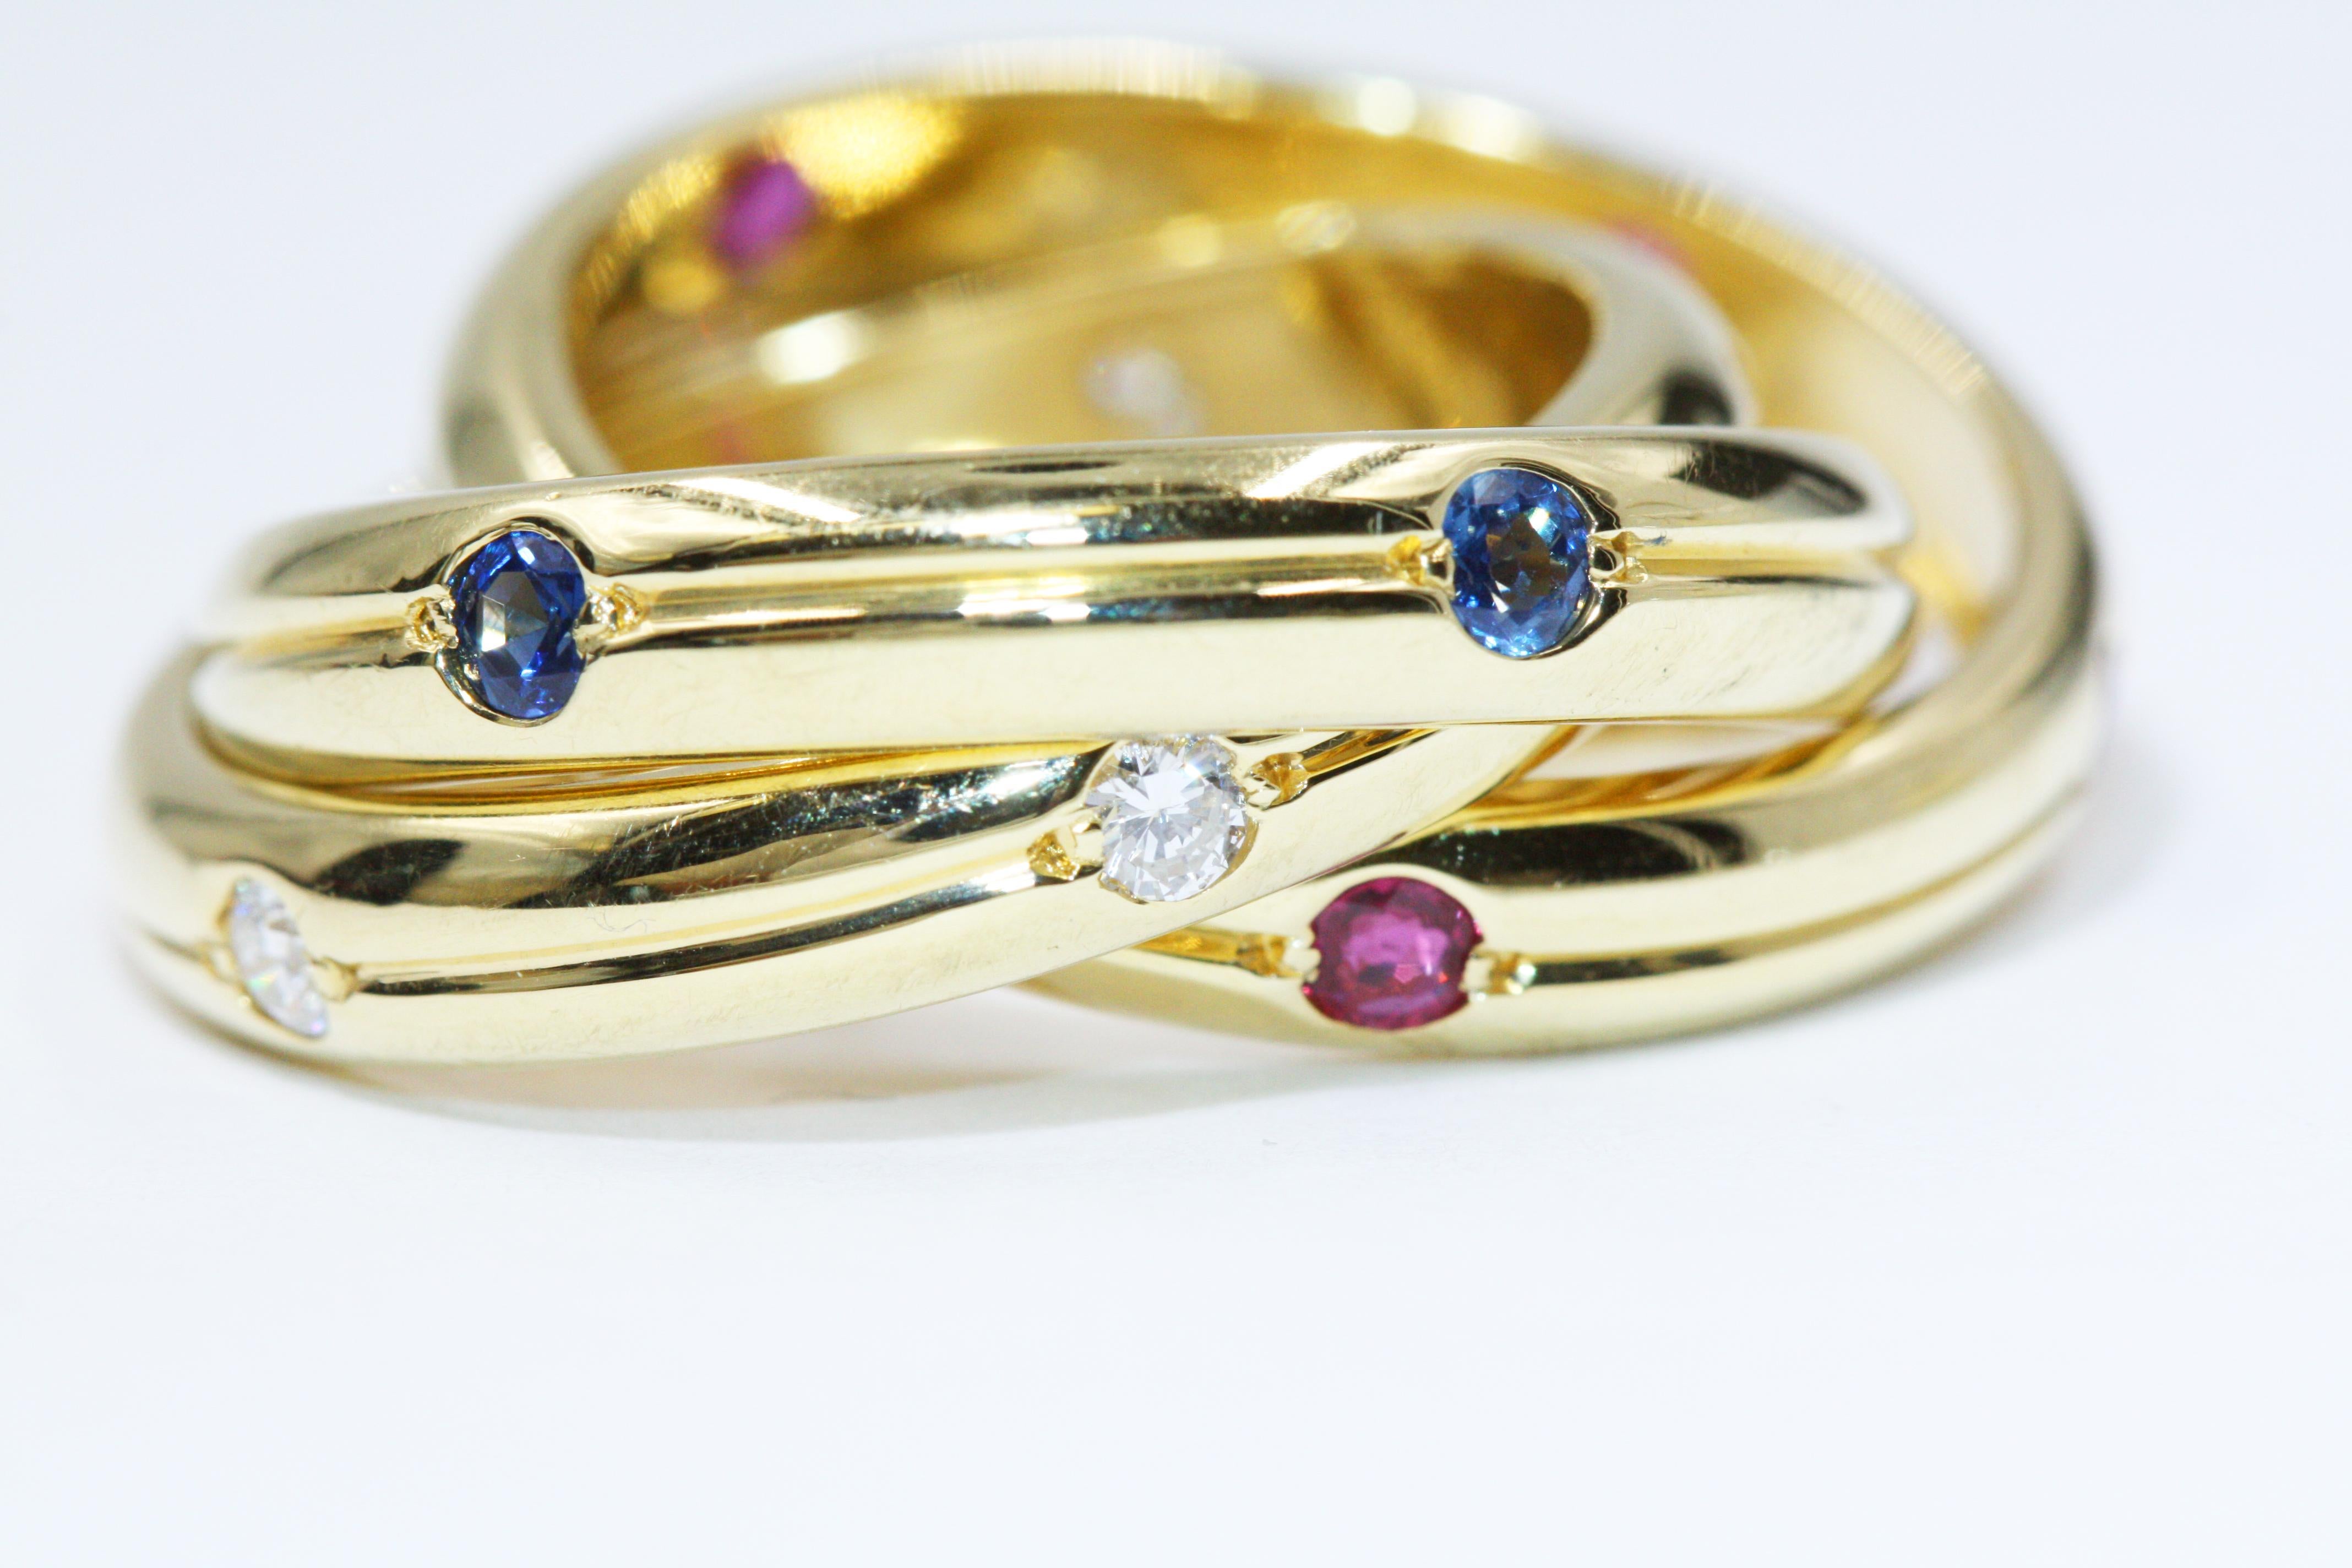 A unique Trinity ring from Cartier, made in yellow gold, set with sapphire diamonds.

Cartier Sapphire Diamond Ruby Ring 

Size EU54 US6.75
Weight: approximate 12.9g
This item will come with a pouch
Stock#: CTR315